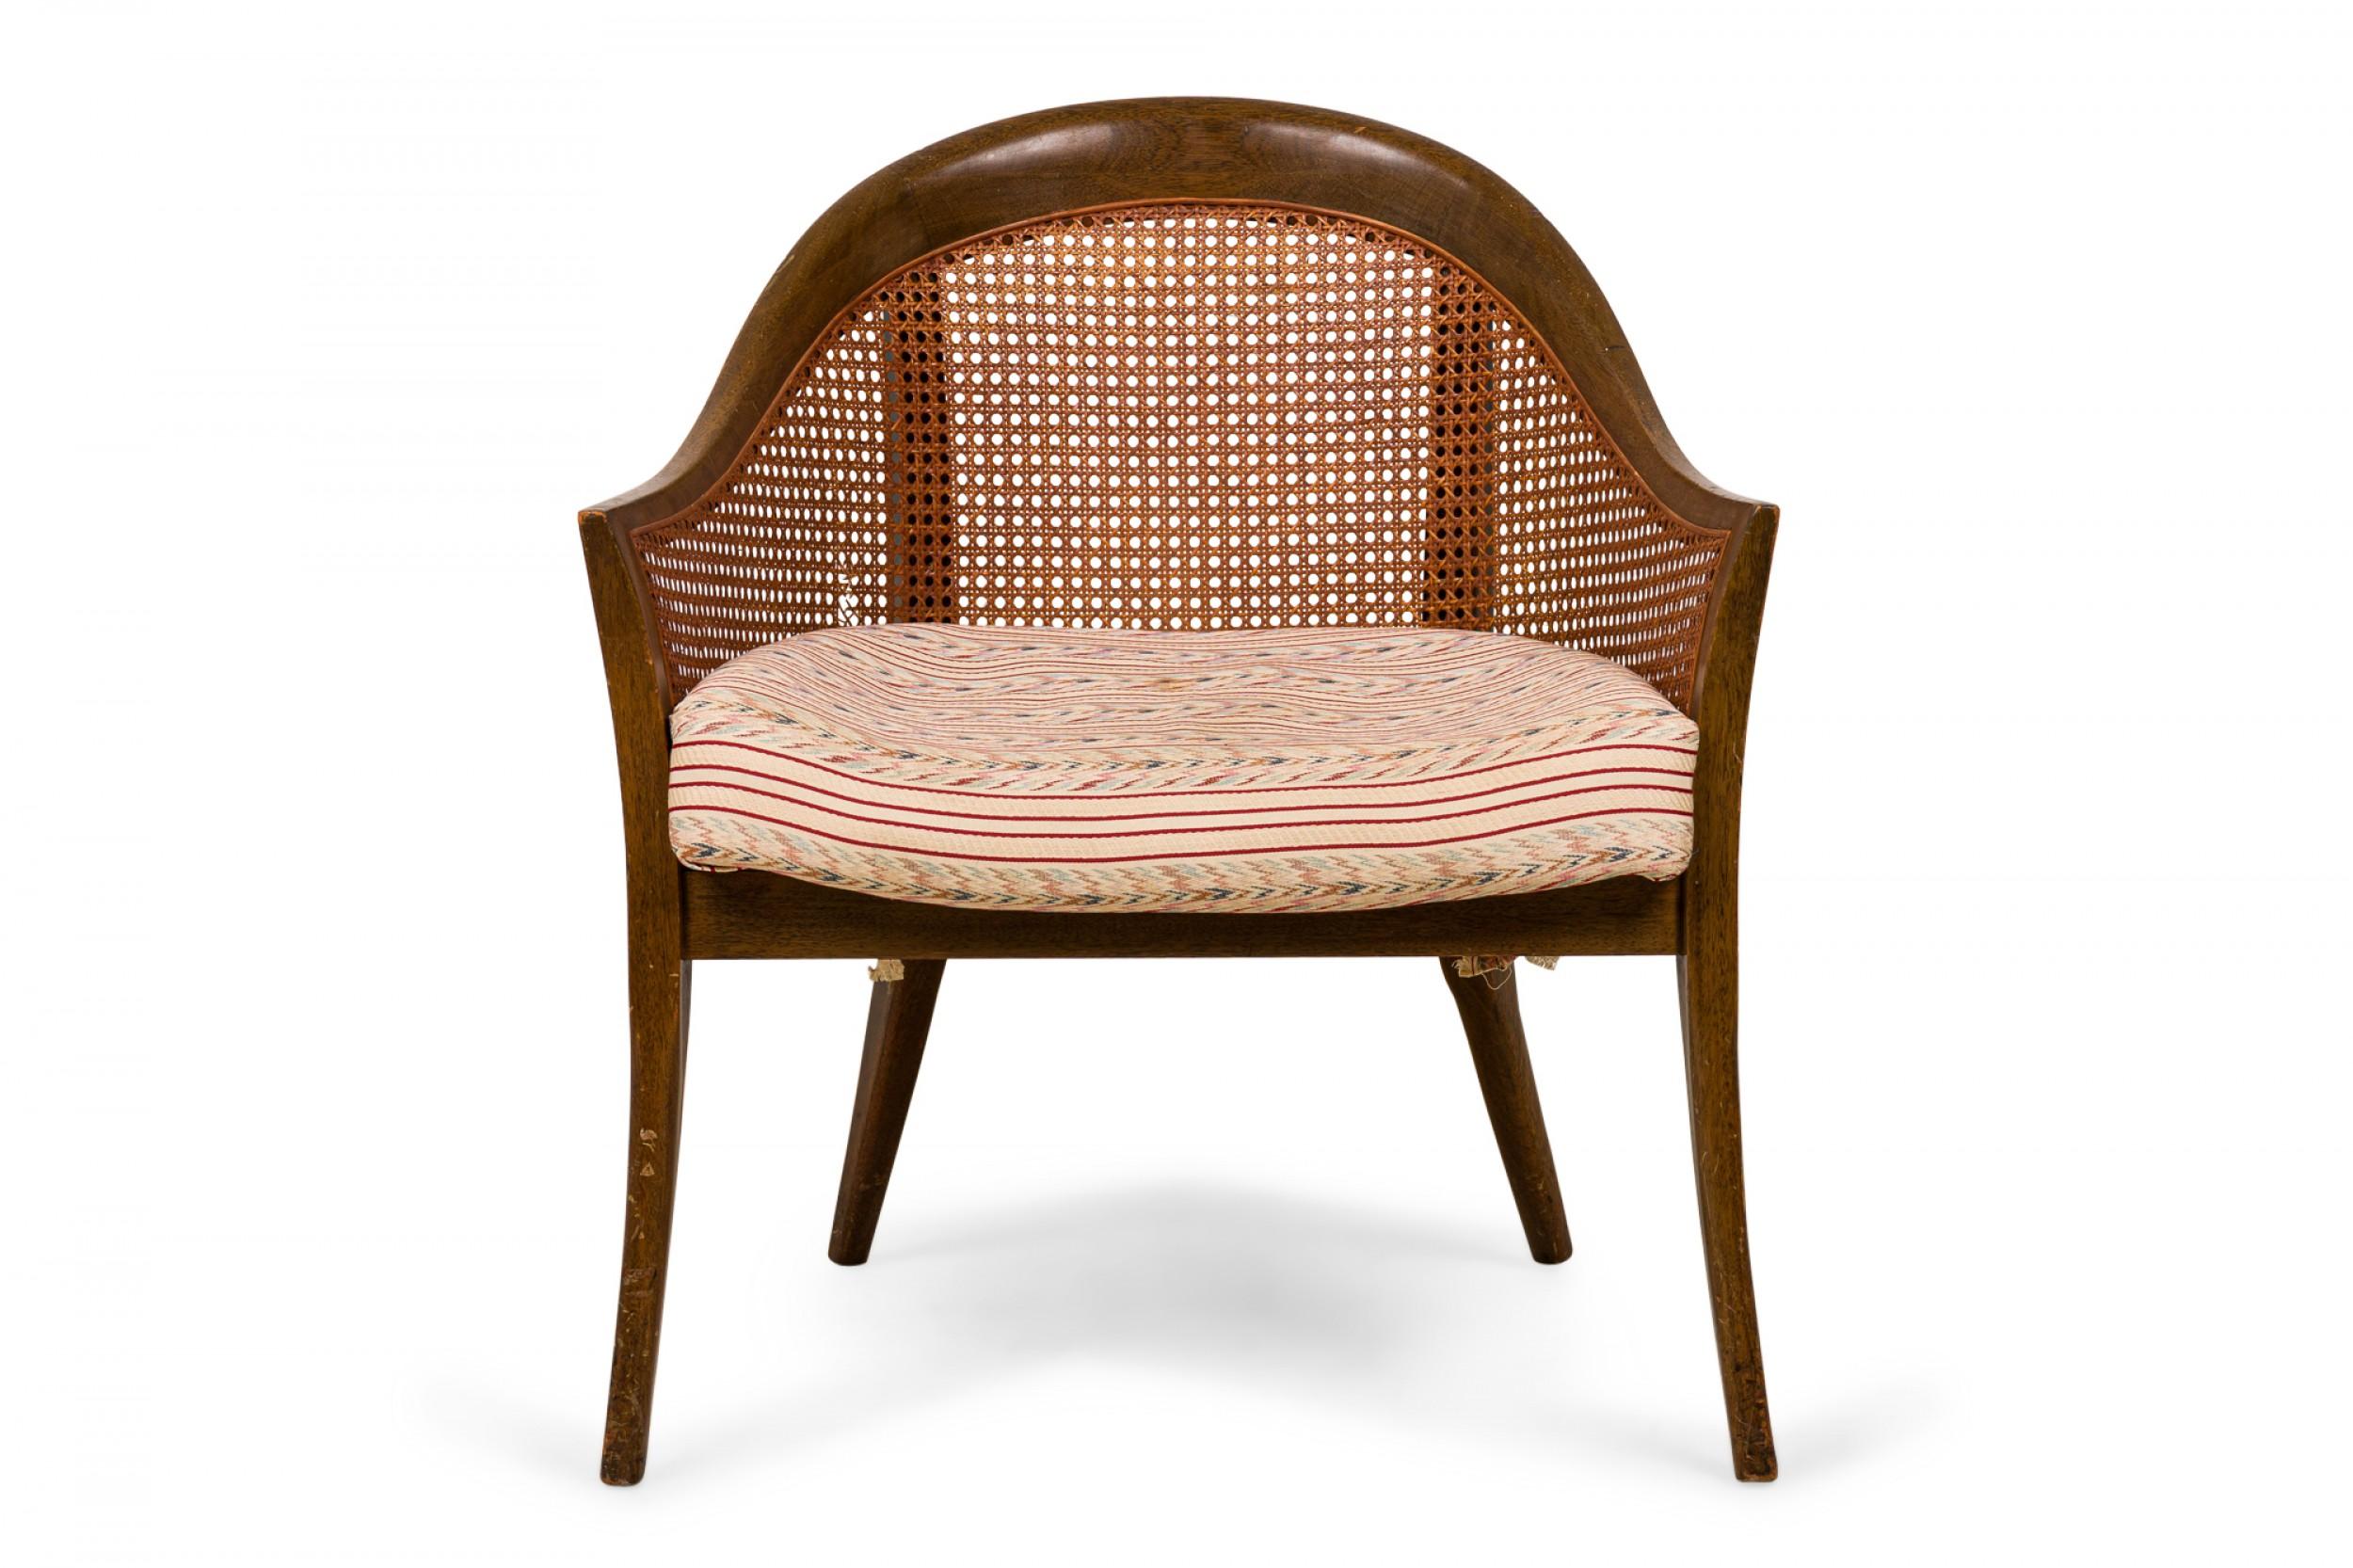 American mid-century armchair with a curved wood frame, caned sides and back, and a multi-colored striped seat cushion, resting on four tapered wooden legs. (HARVEY PROBBER)(Similar chair: DUF0550)